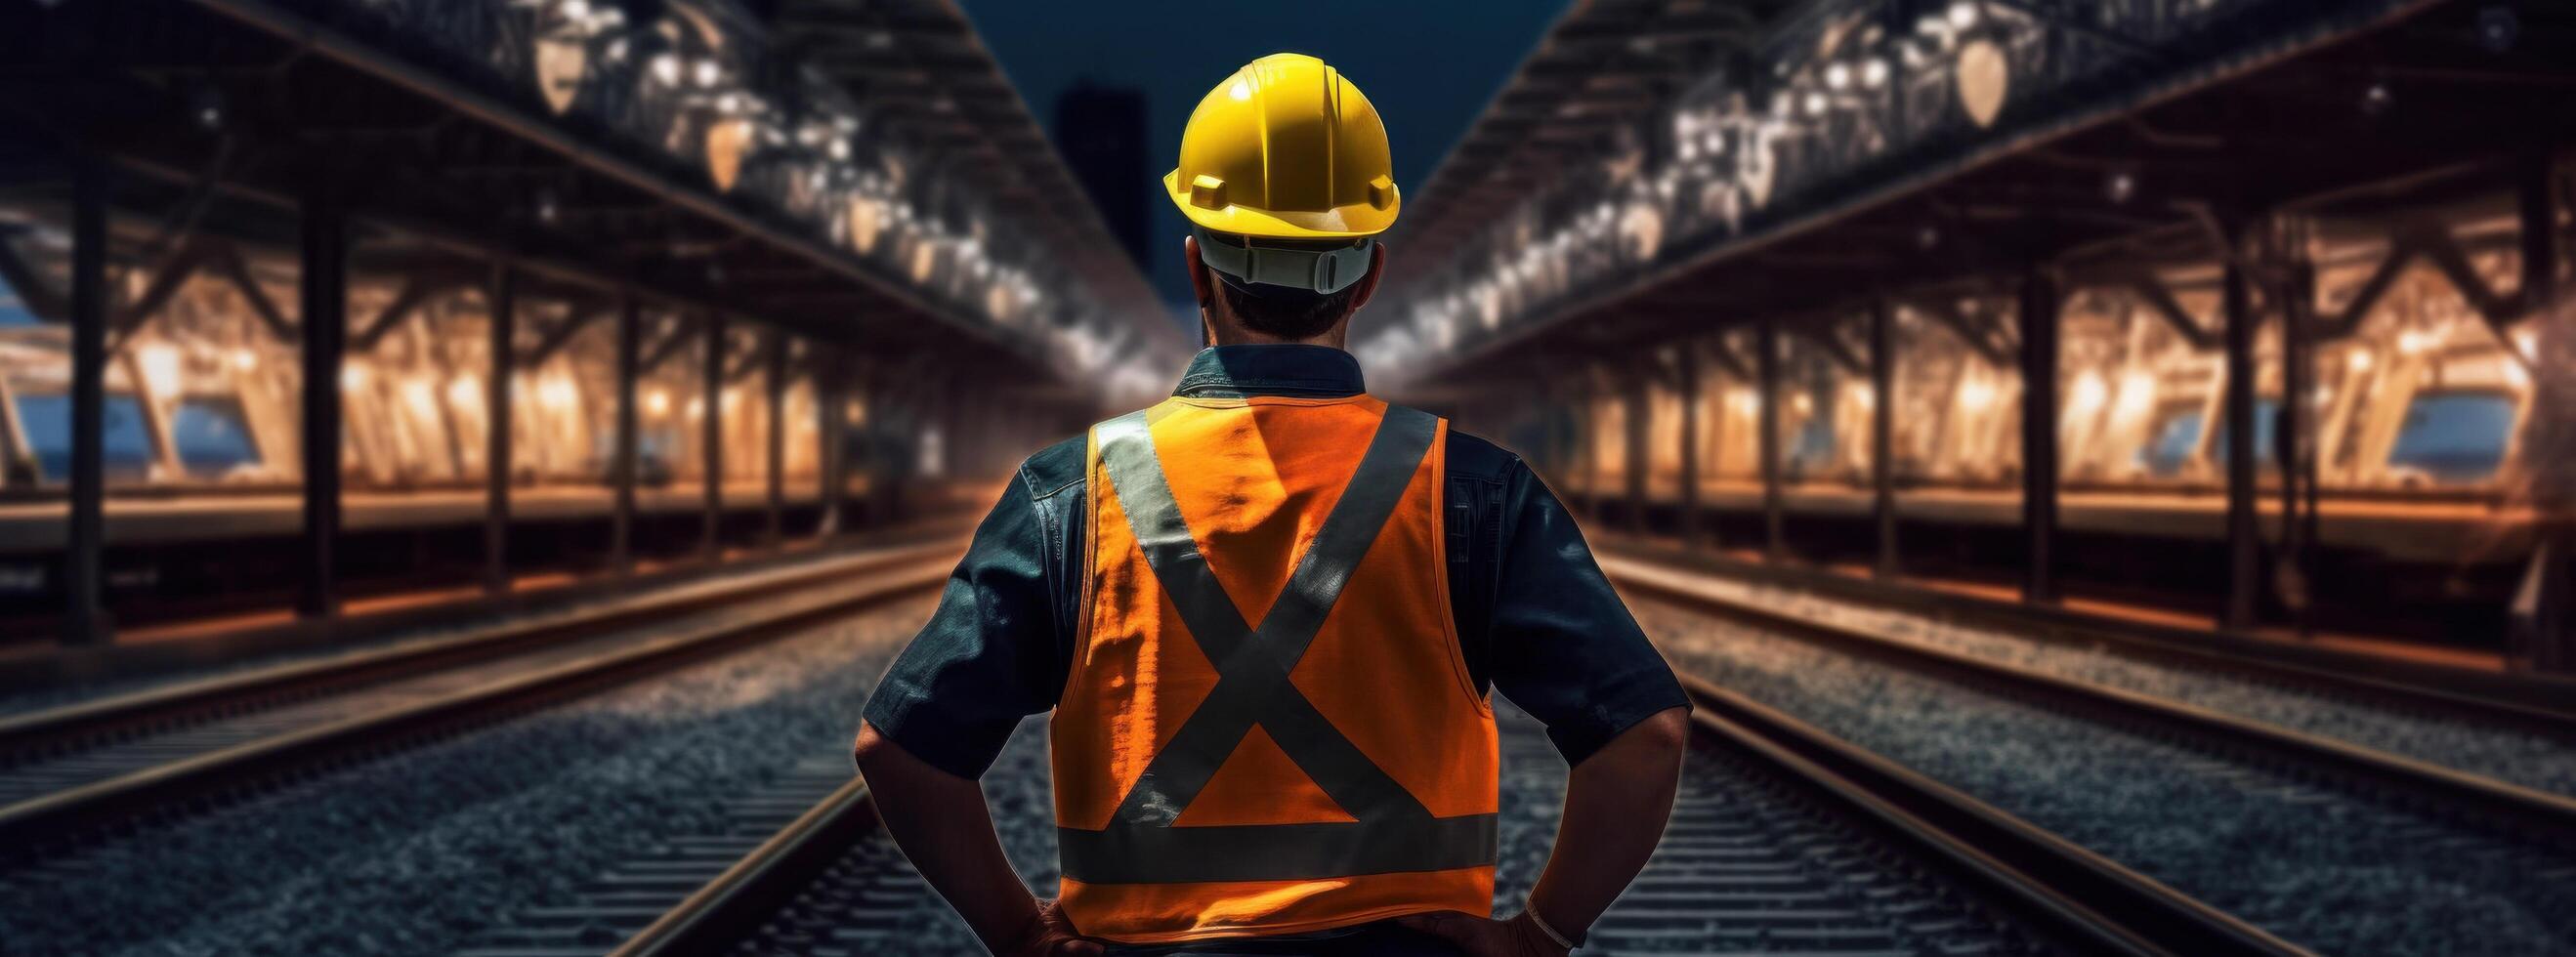 Man in construction gear is standing behind train tracks. Illustration photo